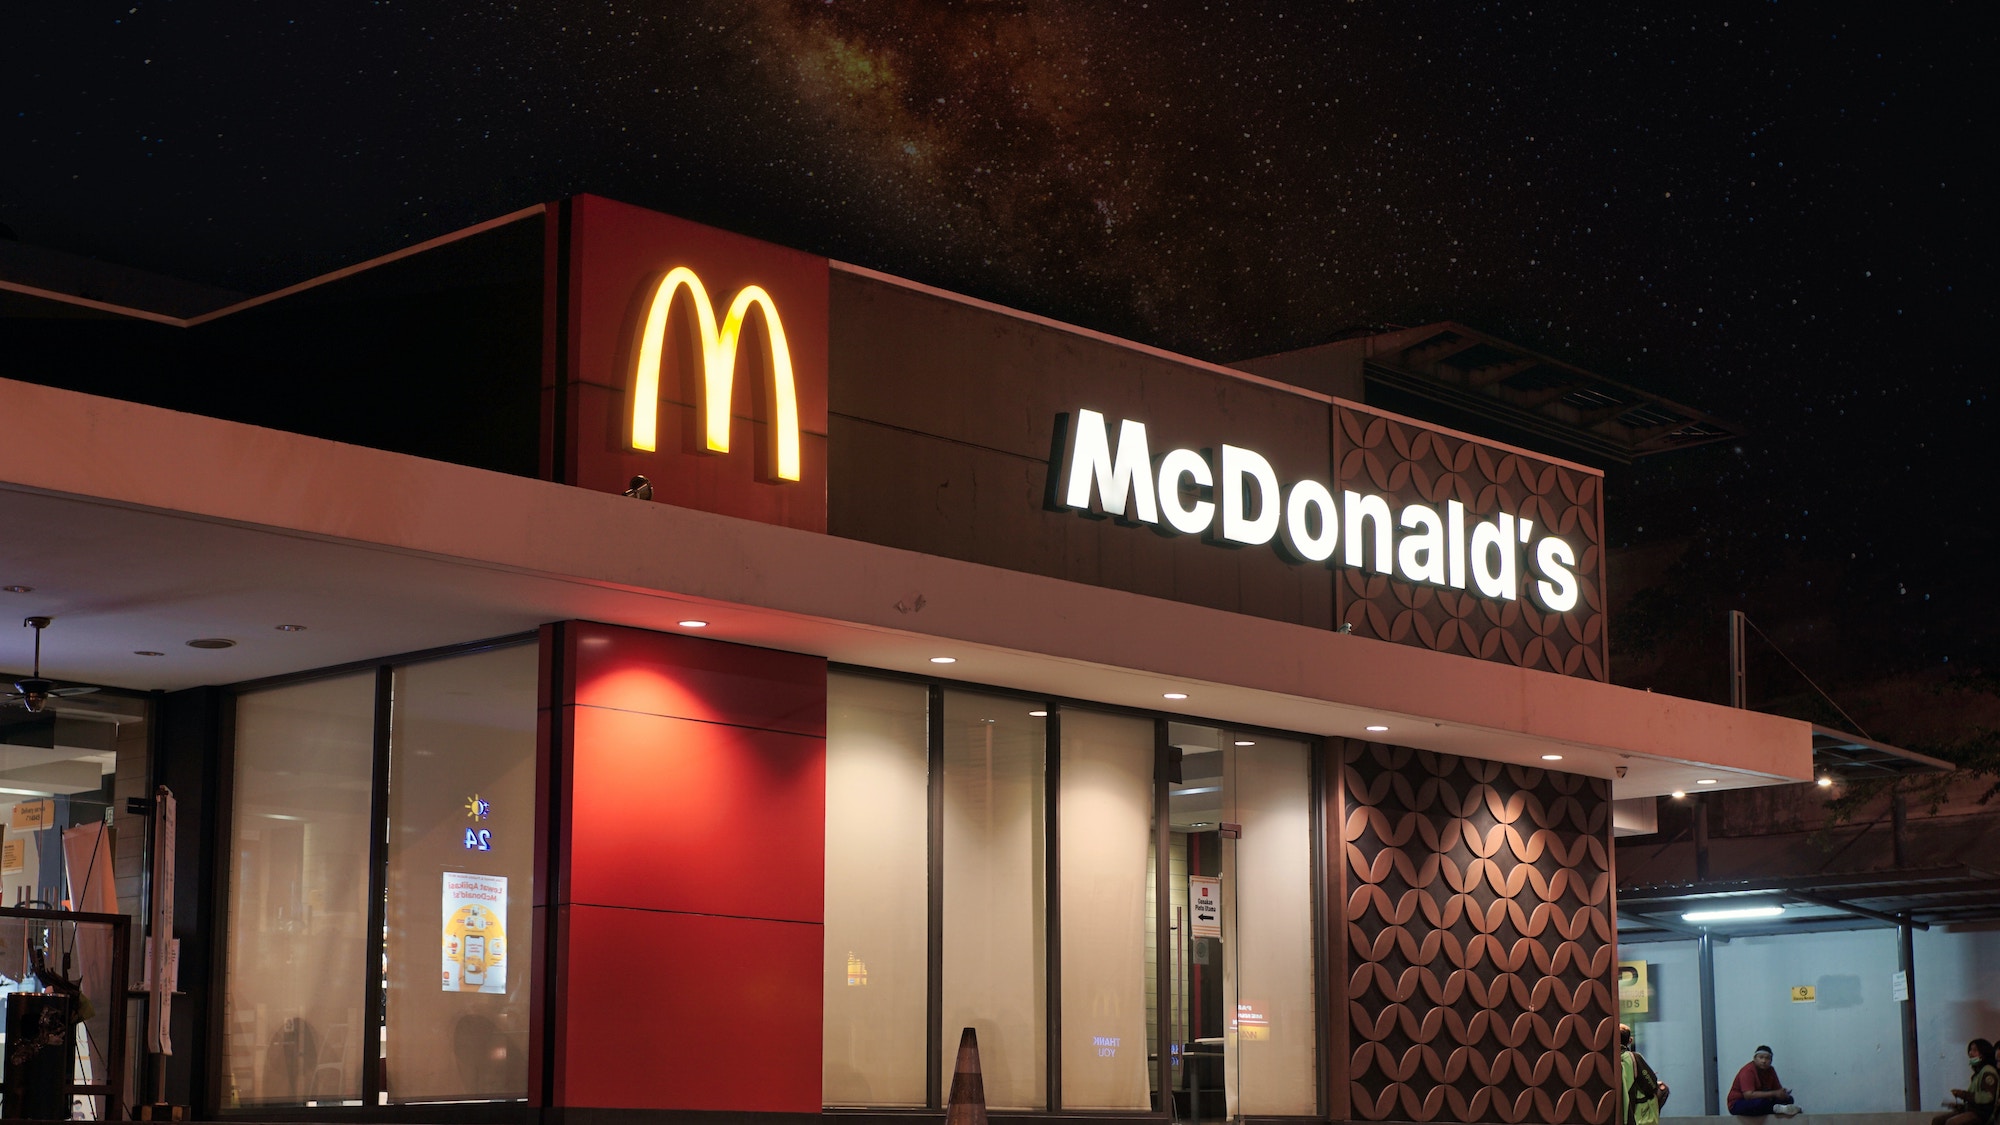 McDonald's takes bold steps to expand and innovate